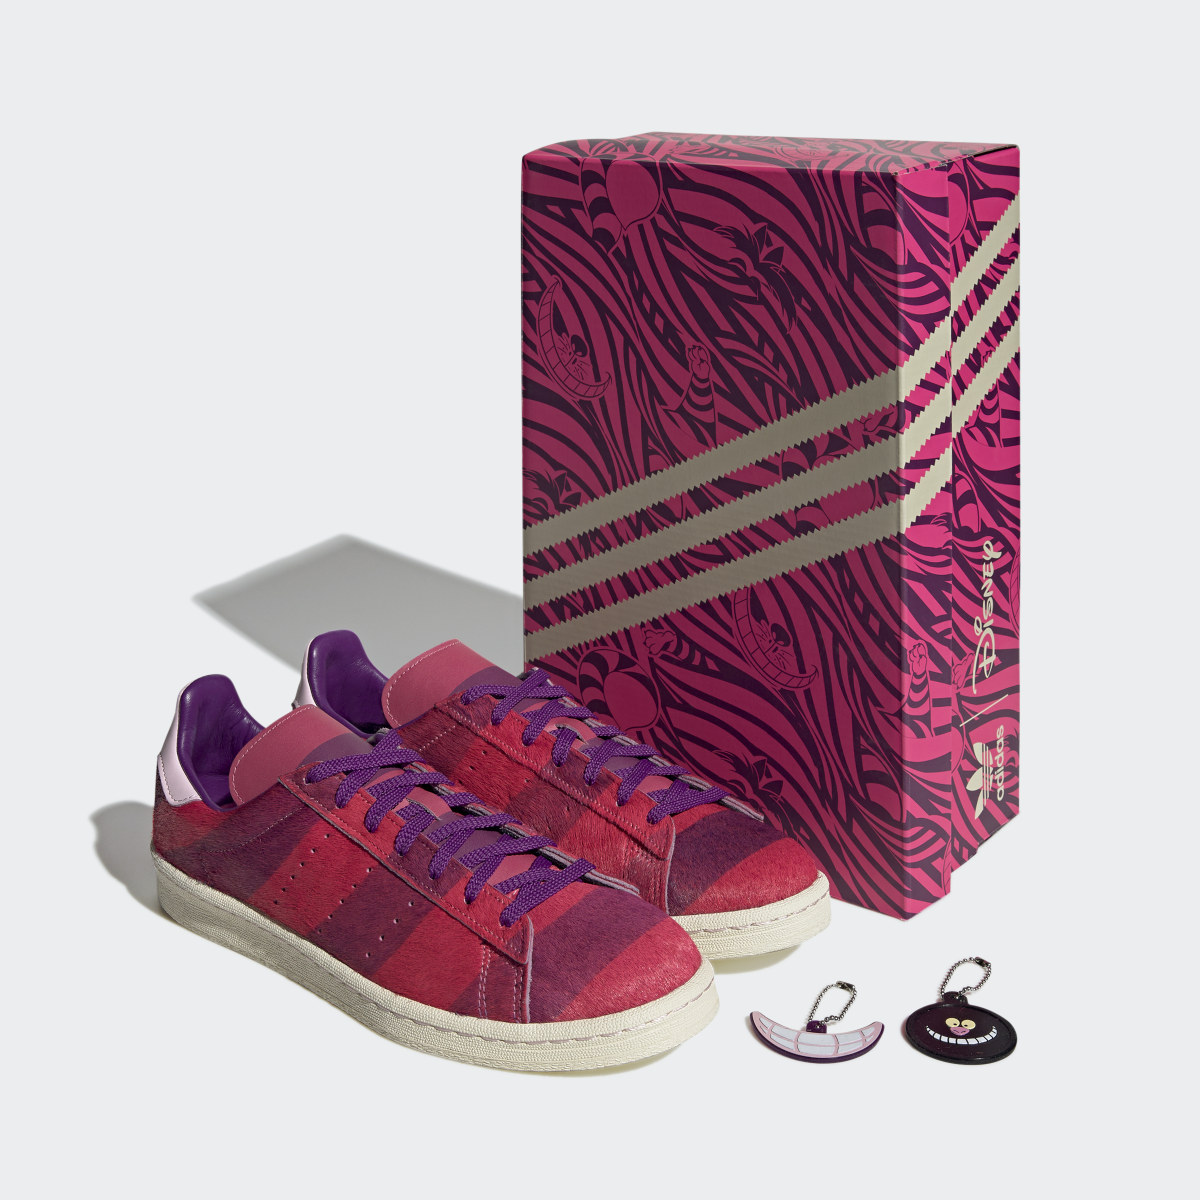 Adidas Campus 80s Cheshire Cat Shoes. 4